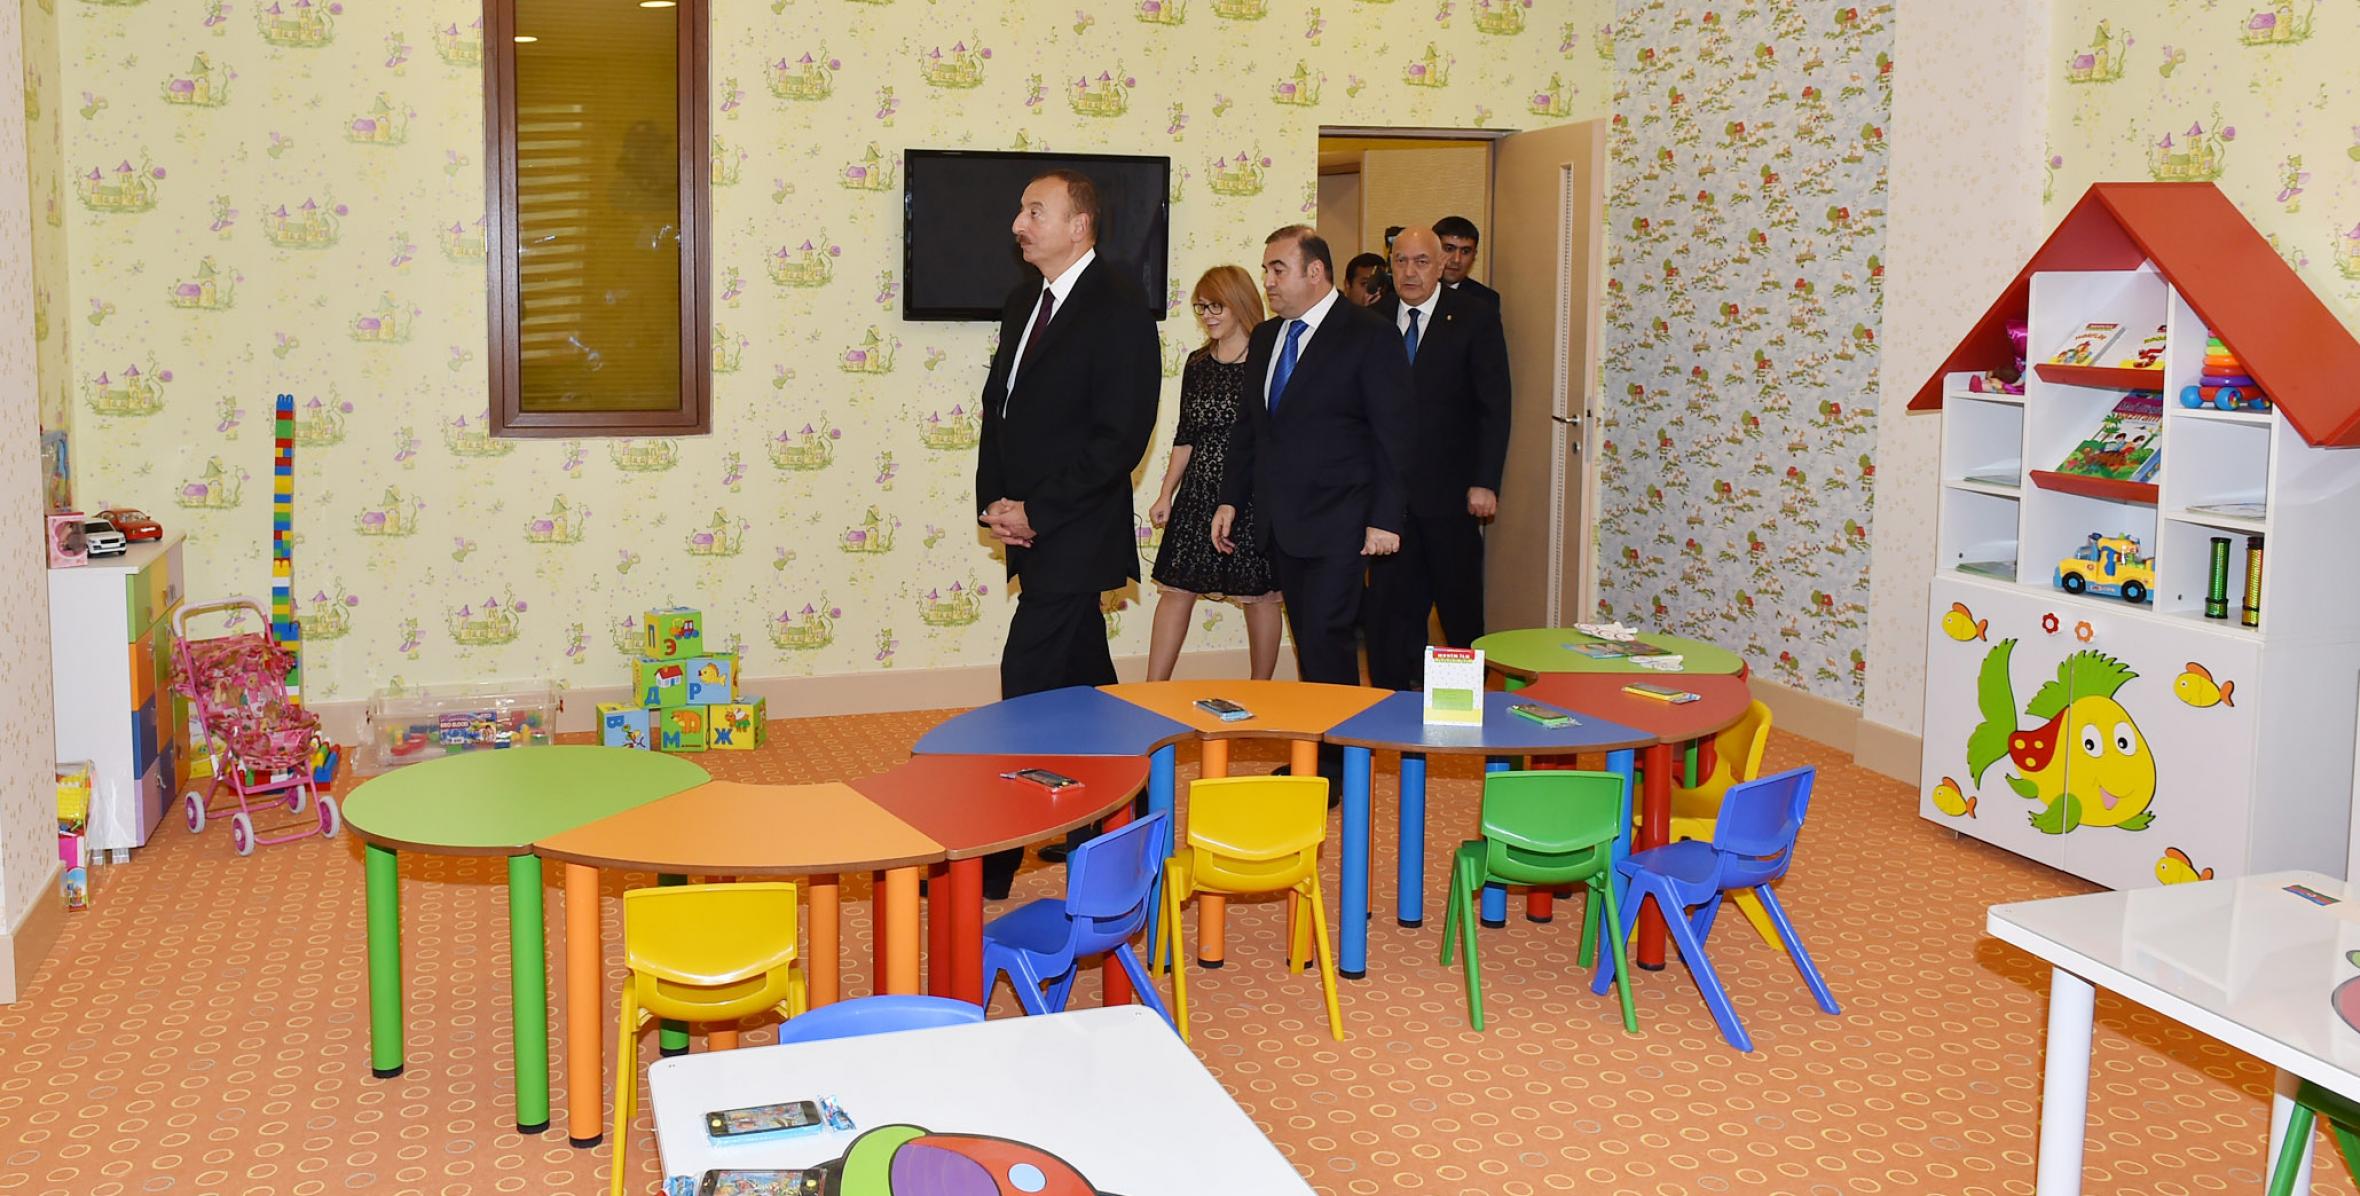 Ilham Aliyev attended the opening of a kindergarten in Ismayilli